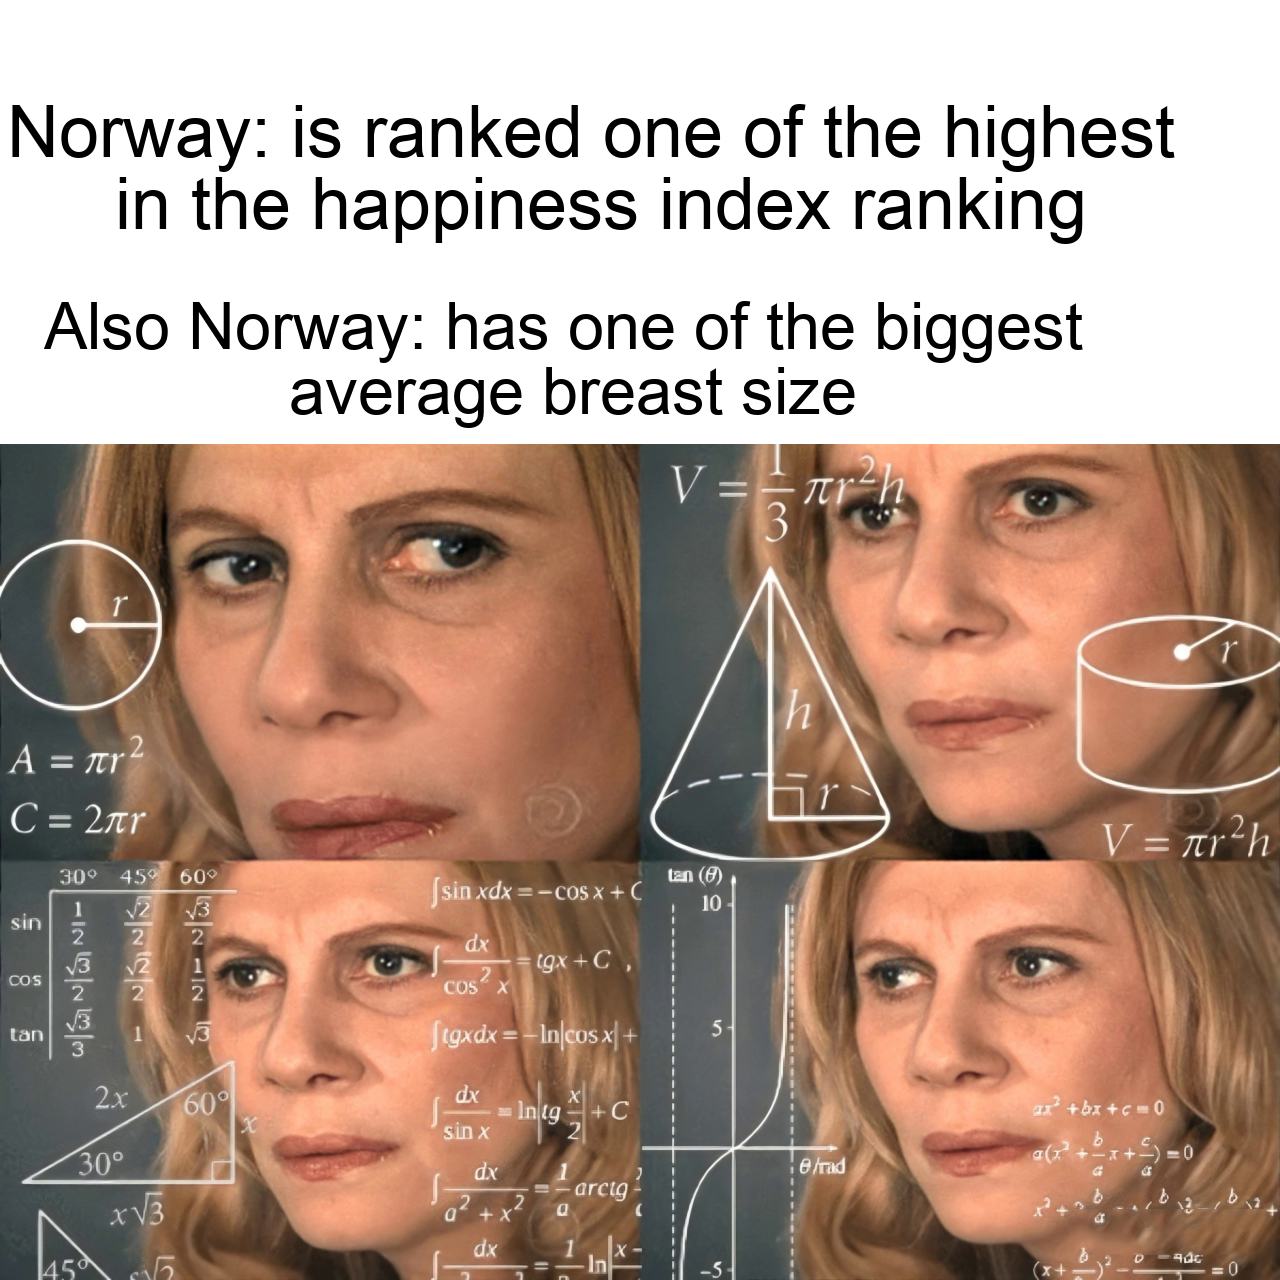 hilarious memes - Norway is ranked one of the highest in the happiness index ranking Also Norway has one of the biggest average breast size V A ar? C 2.tr V rah 3044560 3 22 sin xdxc05xC de gxC. Cos Inss. Cus tan Jogude in cox 2x 009 al b0 intgC Sina 30 X